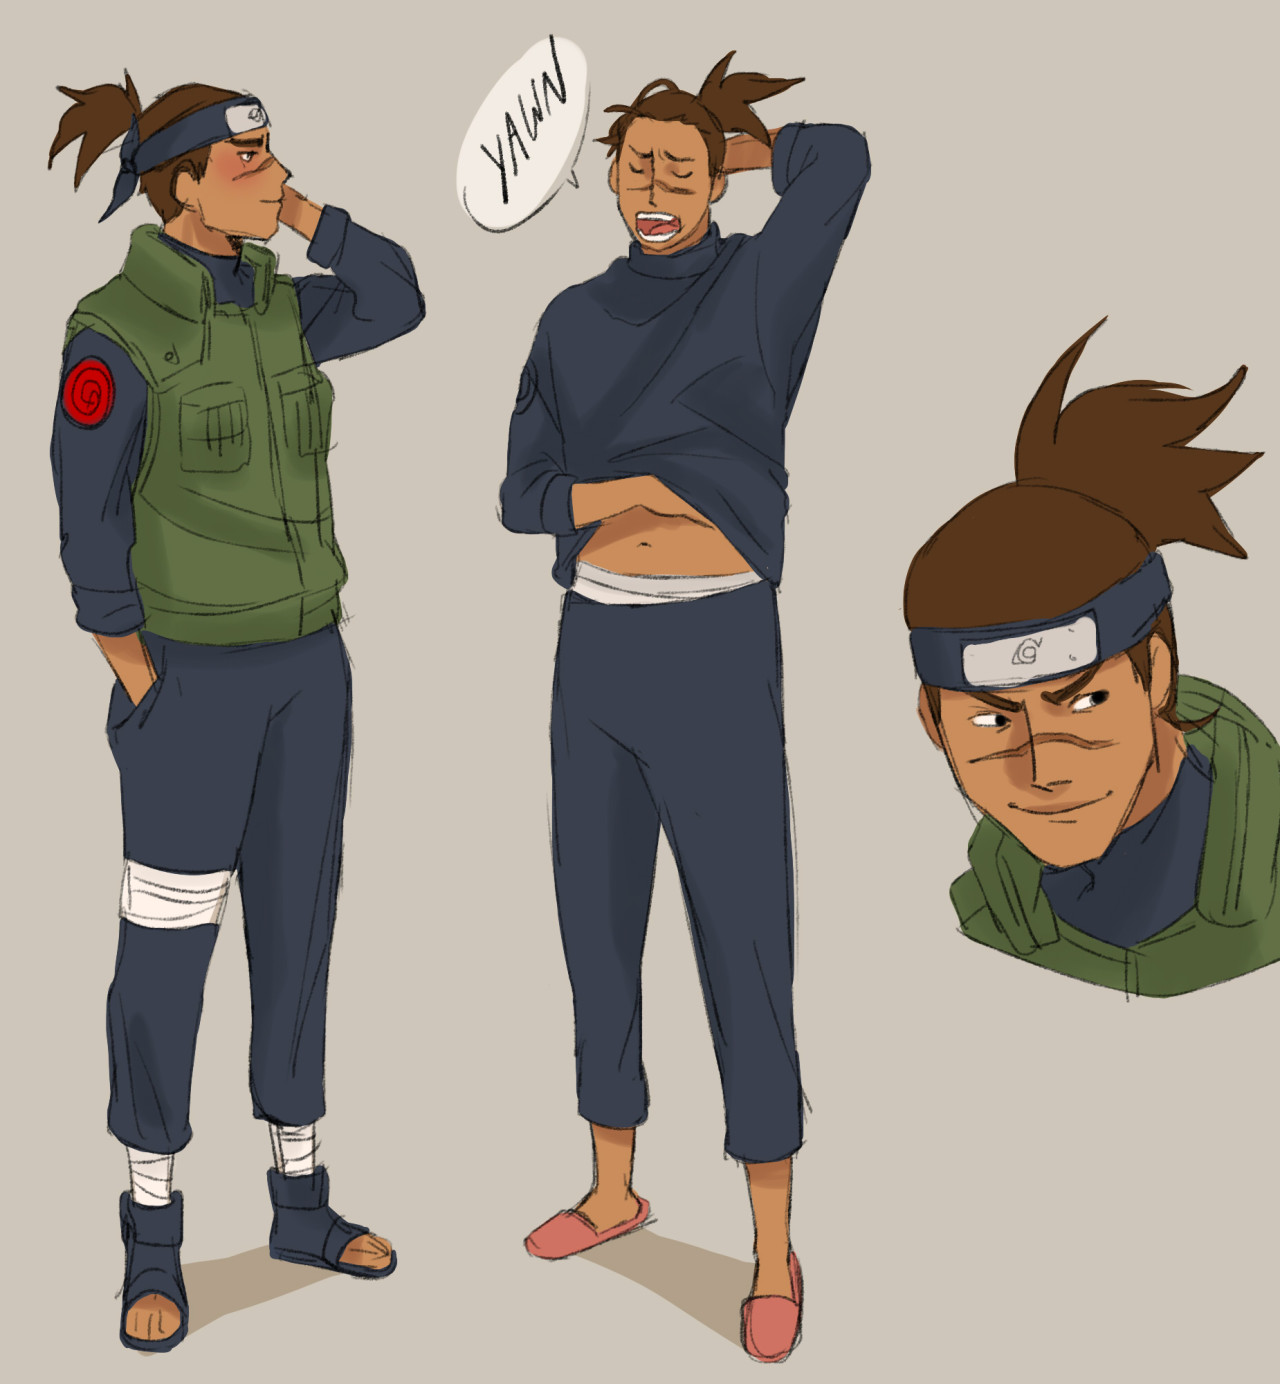 what are your thoughts on iruka-sensei 👀